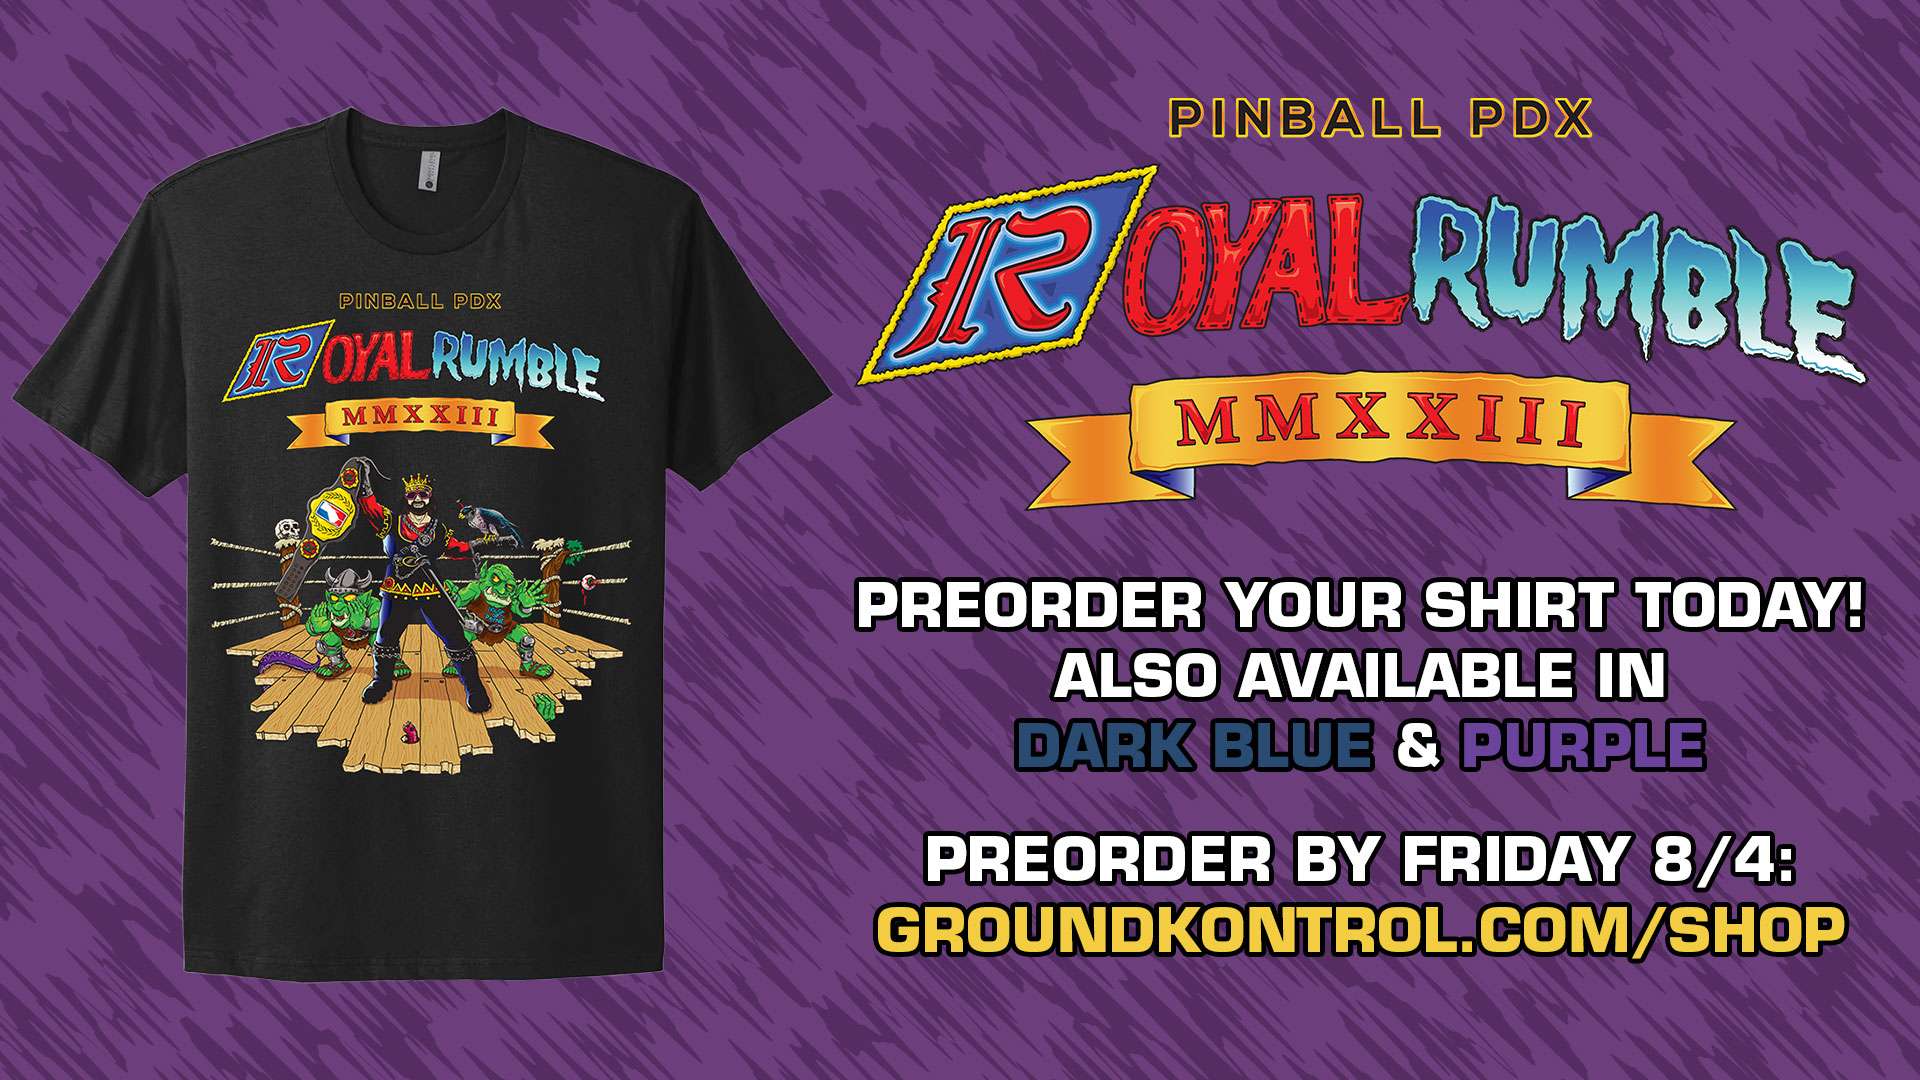 Pre-Order Your Pinball PDX Royal Rumble T-Shirt Today!